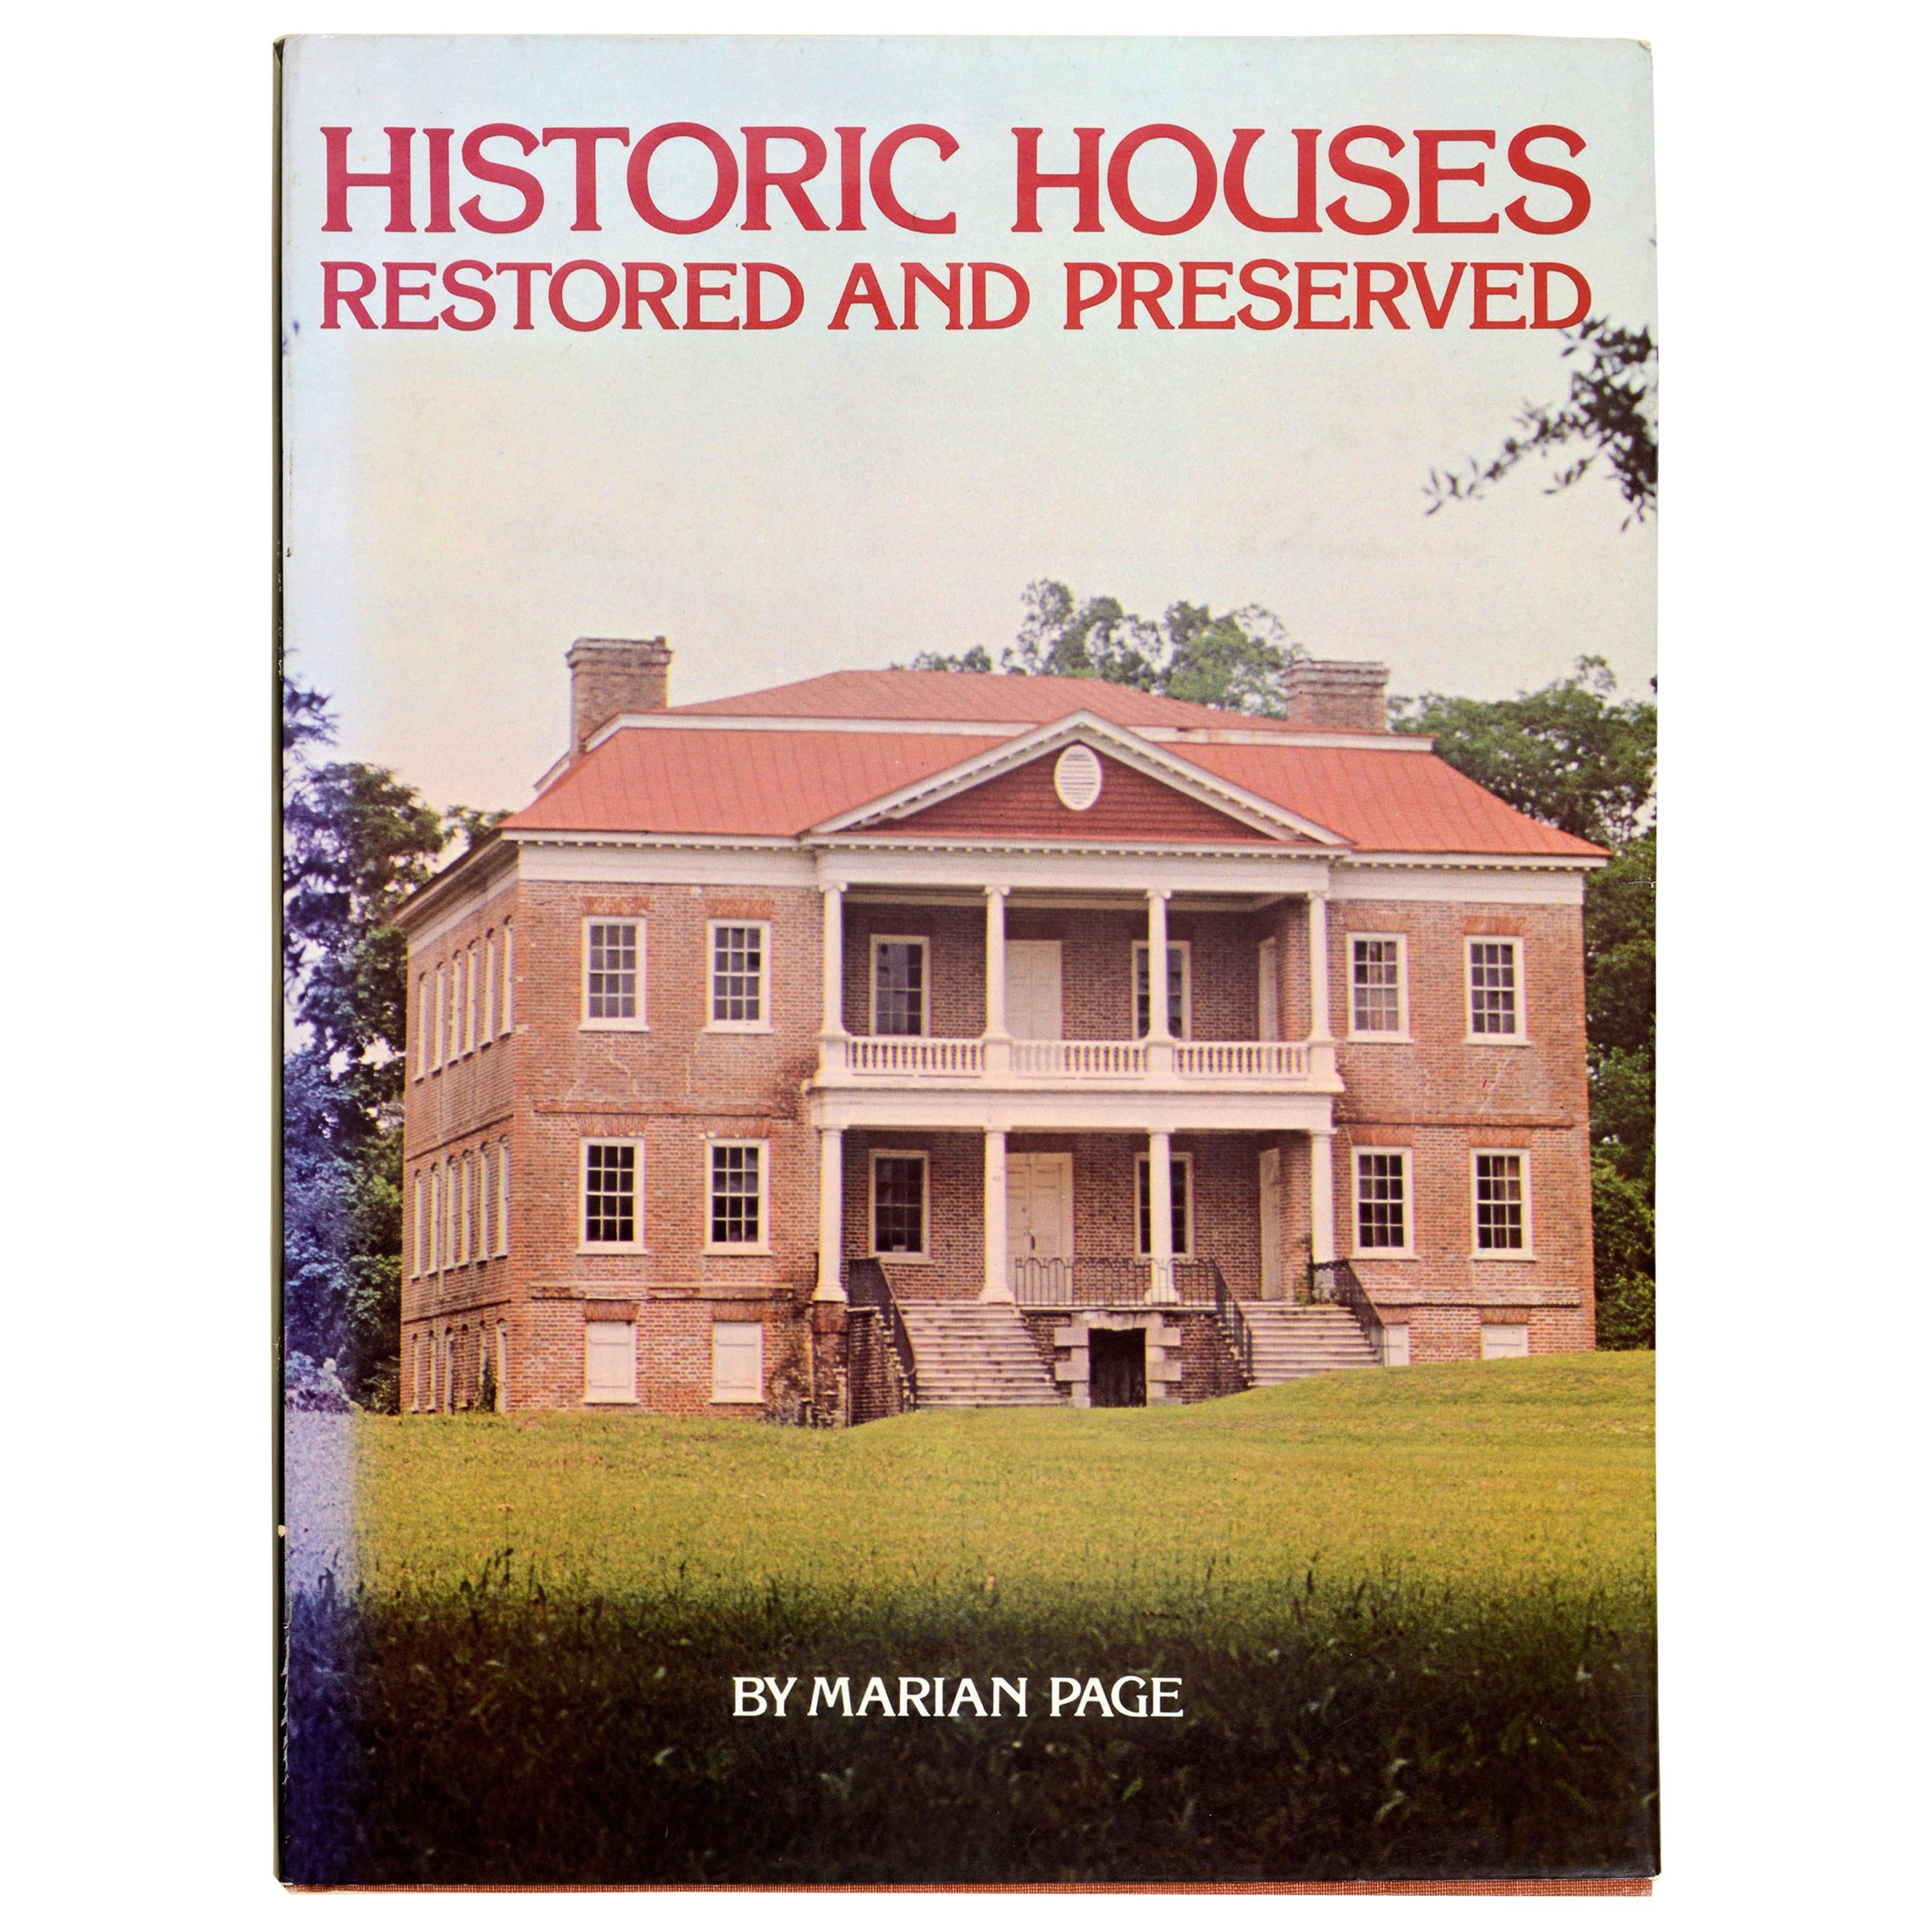 Historic Houses Restored and Preserved by Marian Page, 1st Ed and 1st Printing